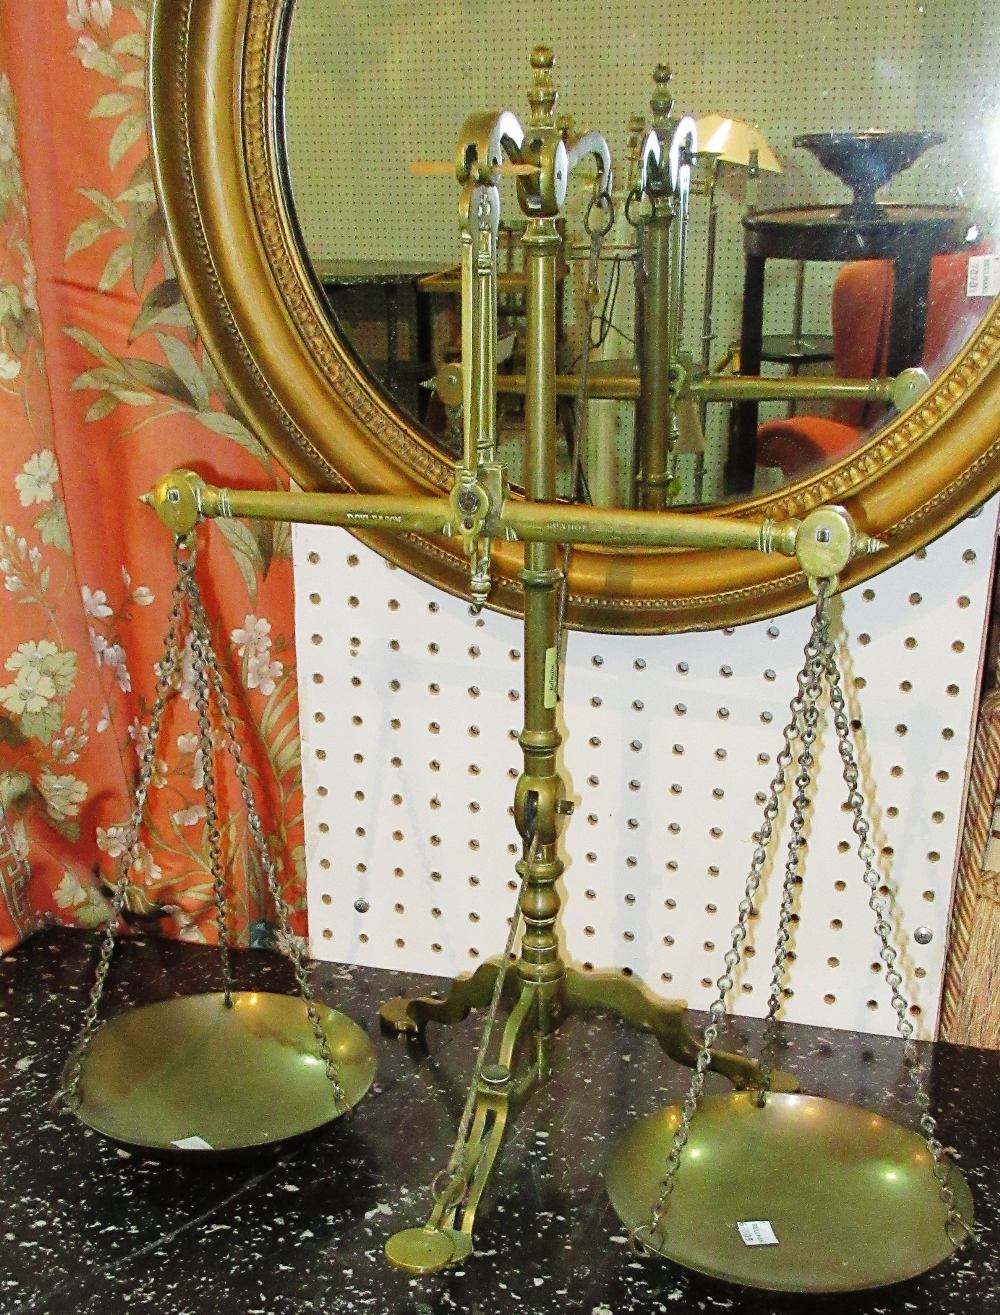 A set of early 20th century Doyle & Co London, brass balance scales.